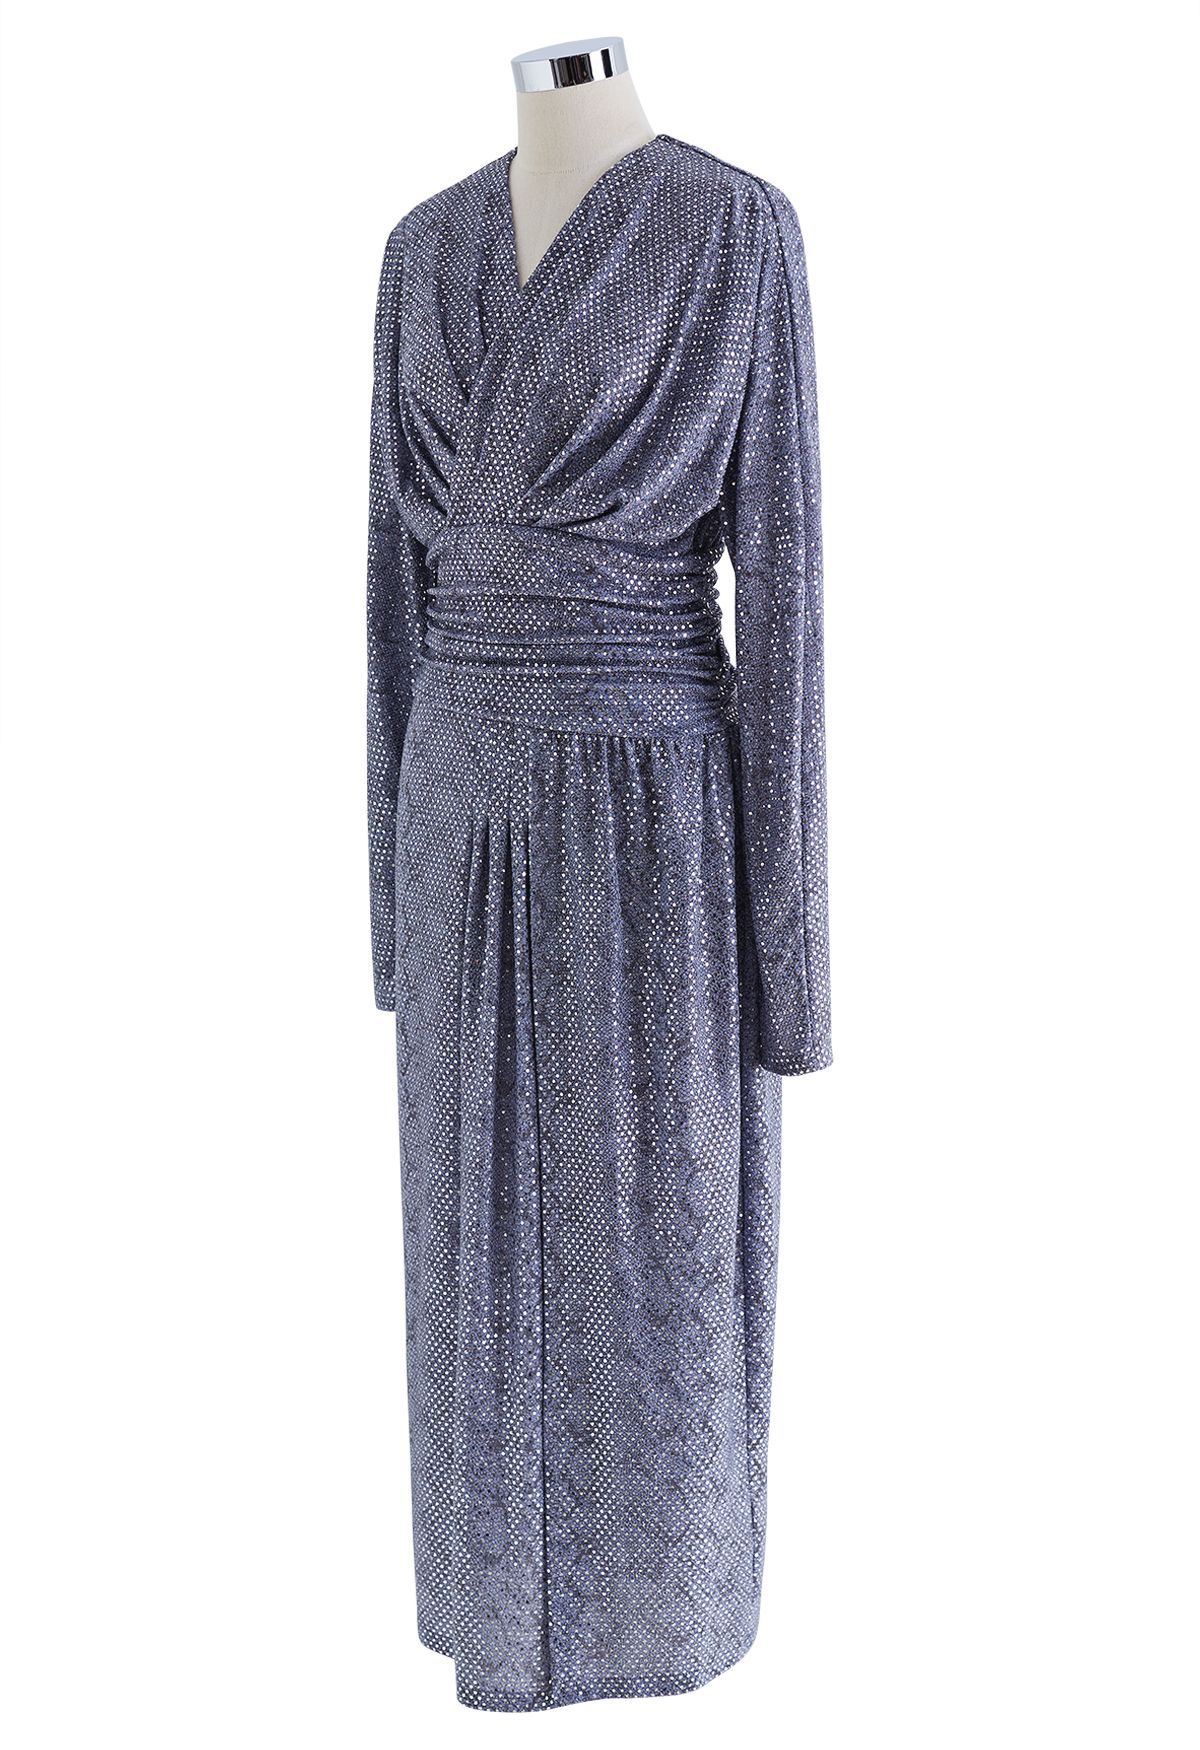 Sequined Snake Print Wrapped Slit Dress in Dusty Blue | Chicwish